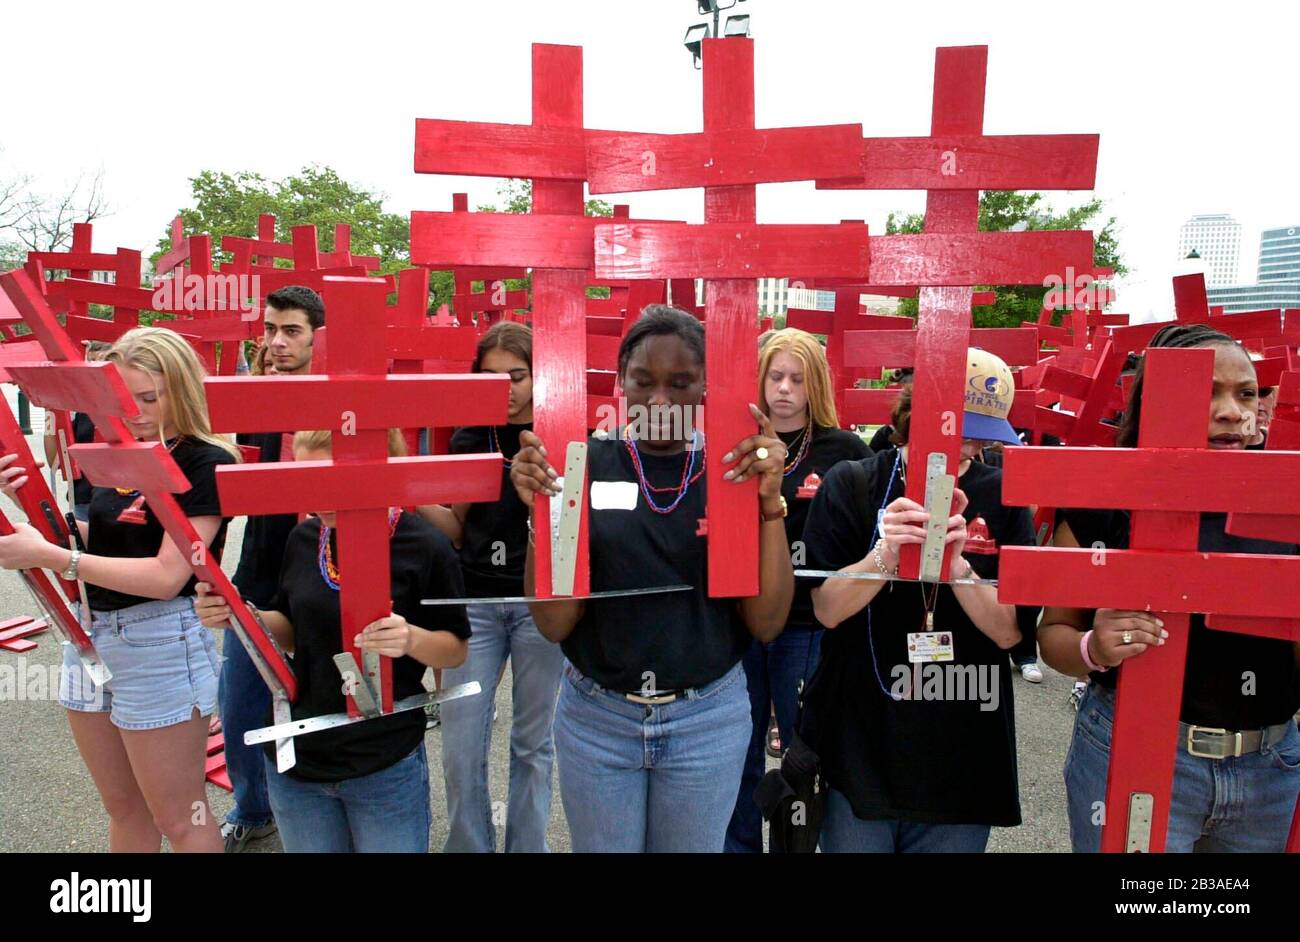 Austin, Texas USA, April 4 2001: More than 200 Texas high school students gathered at the State Capitol carrying 600 crosses signifying the daily U.S. deaths due to smoking and lung disease. The event was staged to highlight the program of Teens Against Tobacco Use (TATU), a peer-based tobacco use prevention program sponsored by the American Lung Association. ©Bob Daemmrich Stock Photo